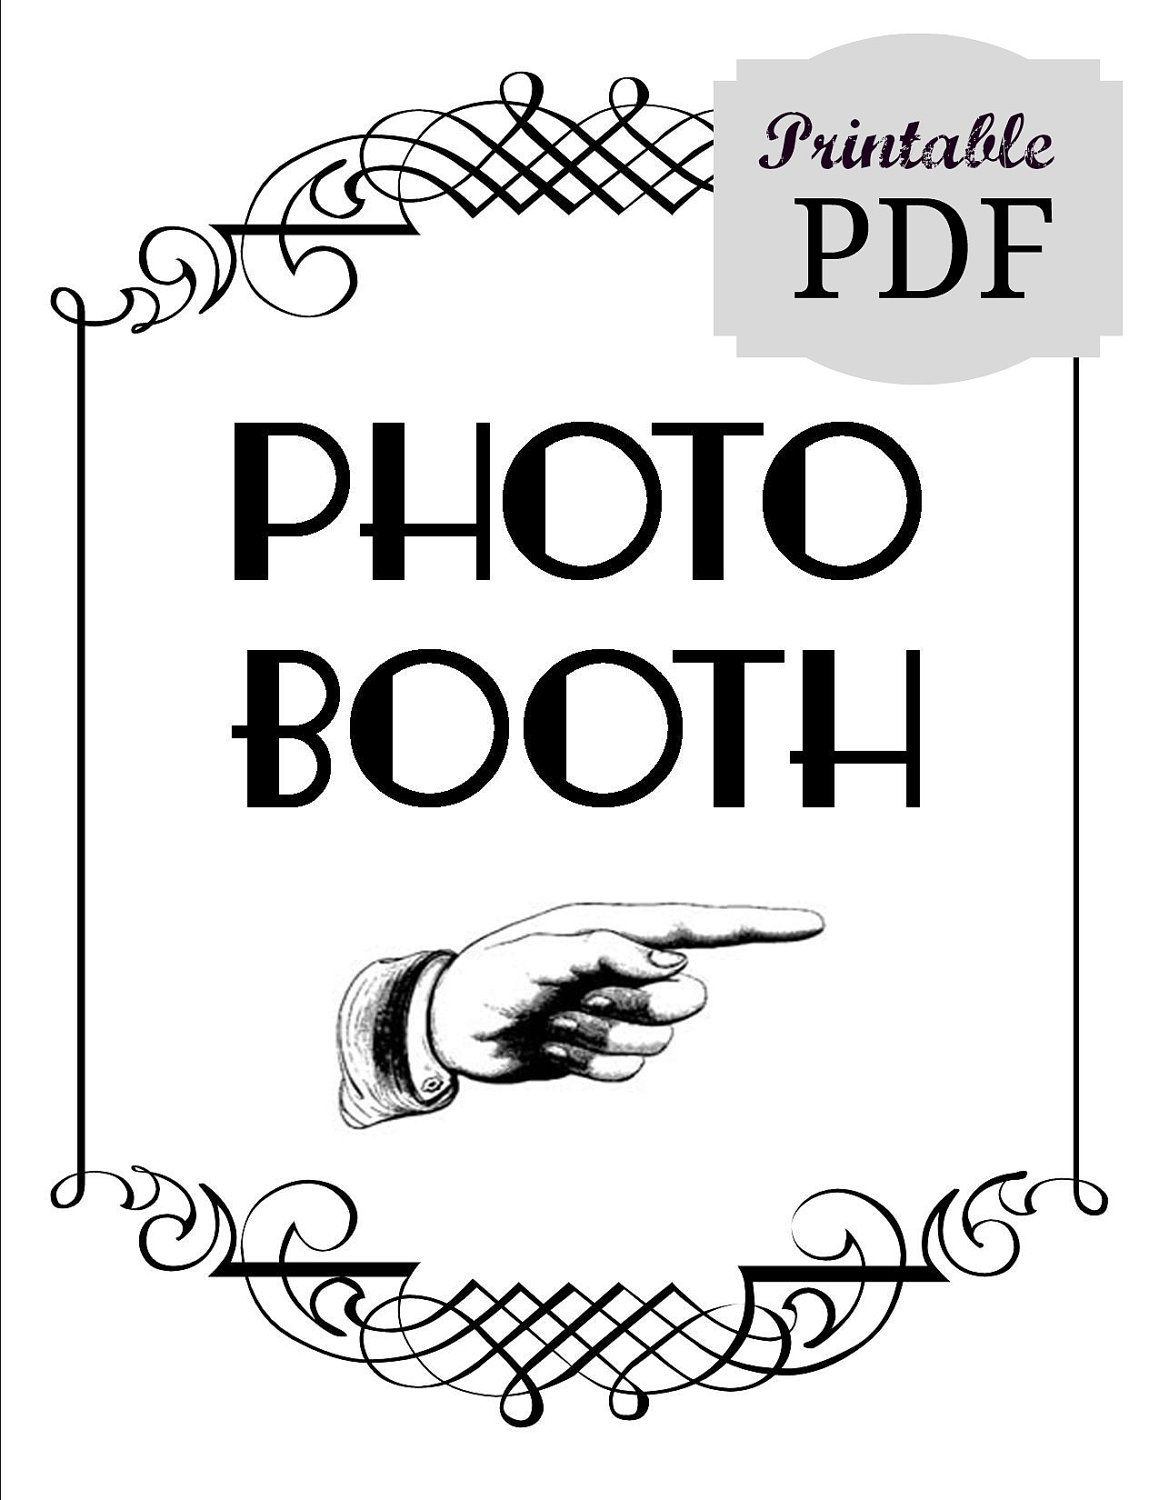 Diy Printable Pdf Photo Booth Sign. Photo Booth Prop. Photobooth throughout Free Printable Photo Booth Sign